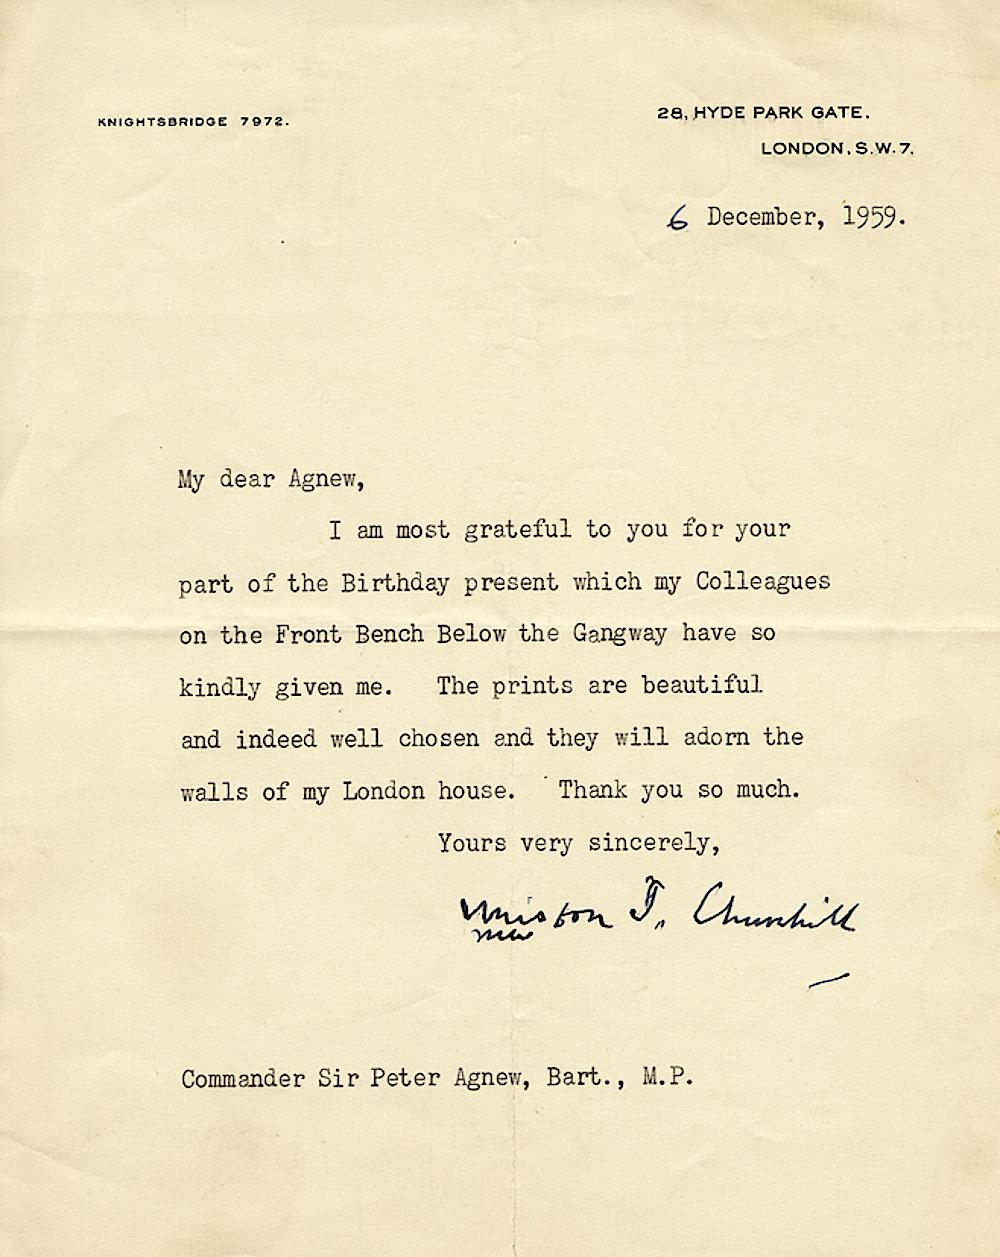 A typed and signed letter from British Prime Minister Winston Churchill

Winston Churchill (1874 –1965) was a politician and statesman who twice served as British Prime Minister, and is regarded as one of the most influential people in British